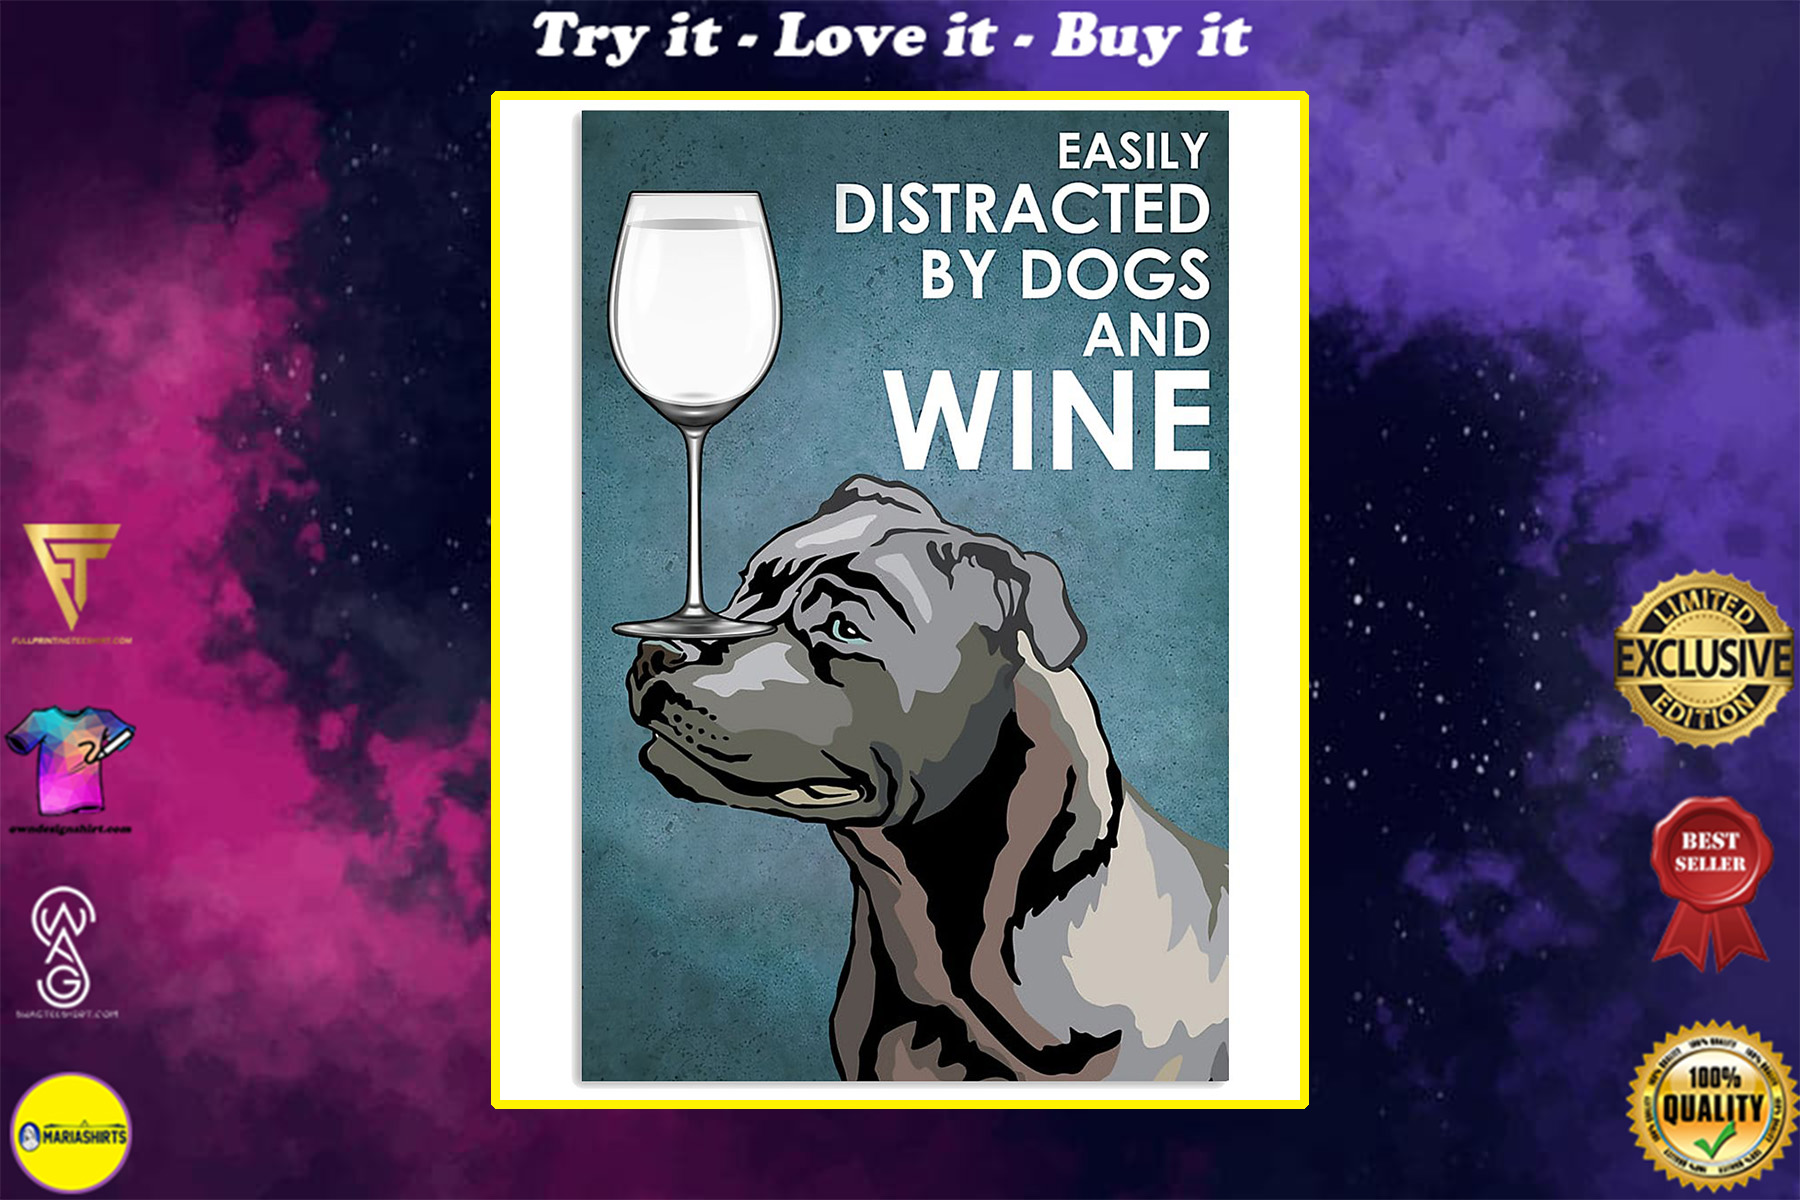 staffordshire bull terrier easily distracted by dogs and wine poster